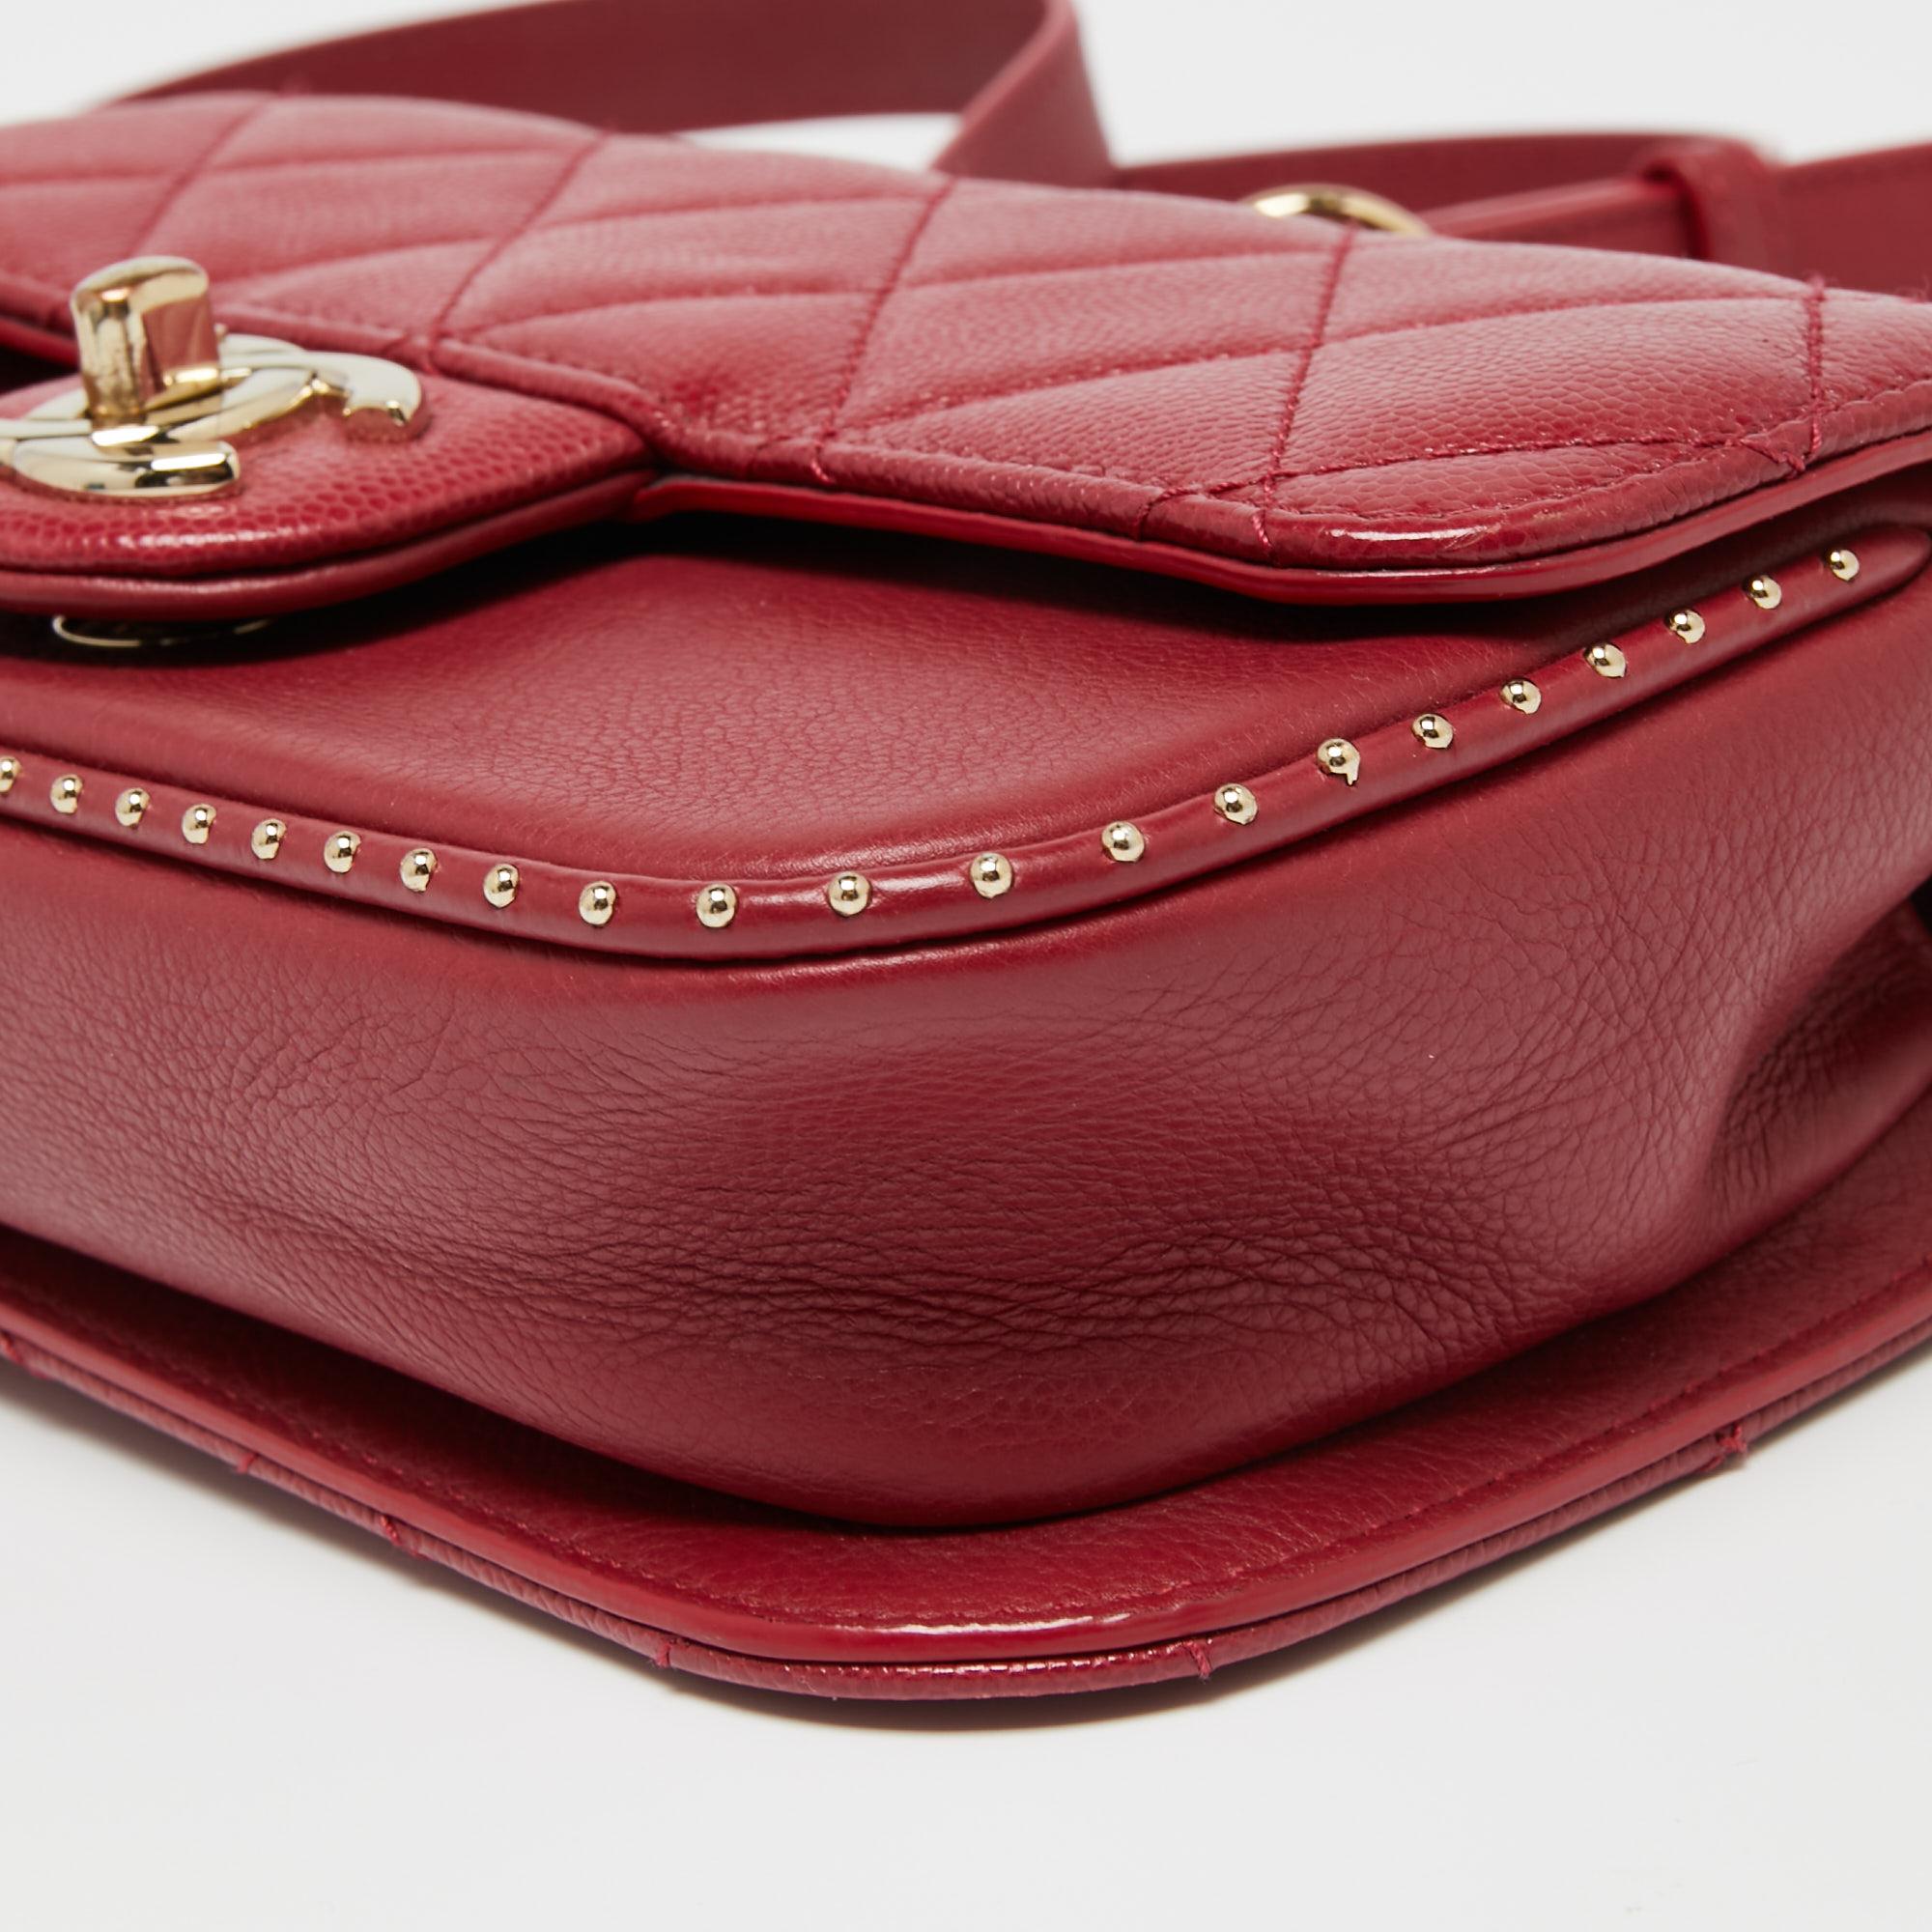 Chanel Cherry Red Caviar Quilted Leather Small Studded Flap Bag 6